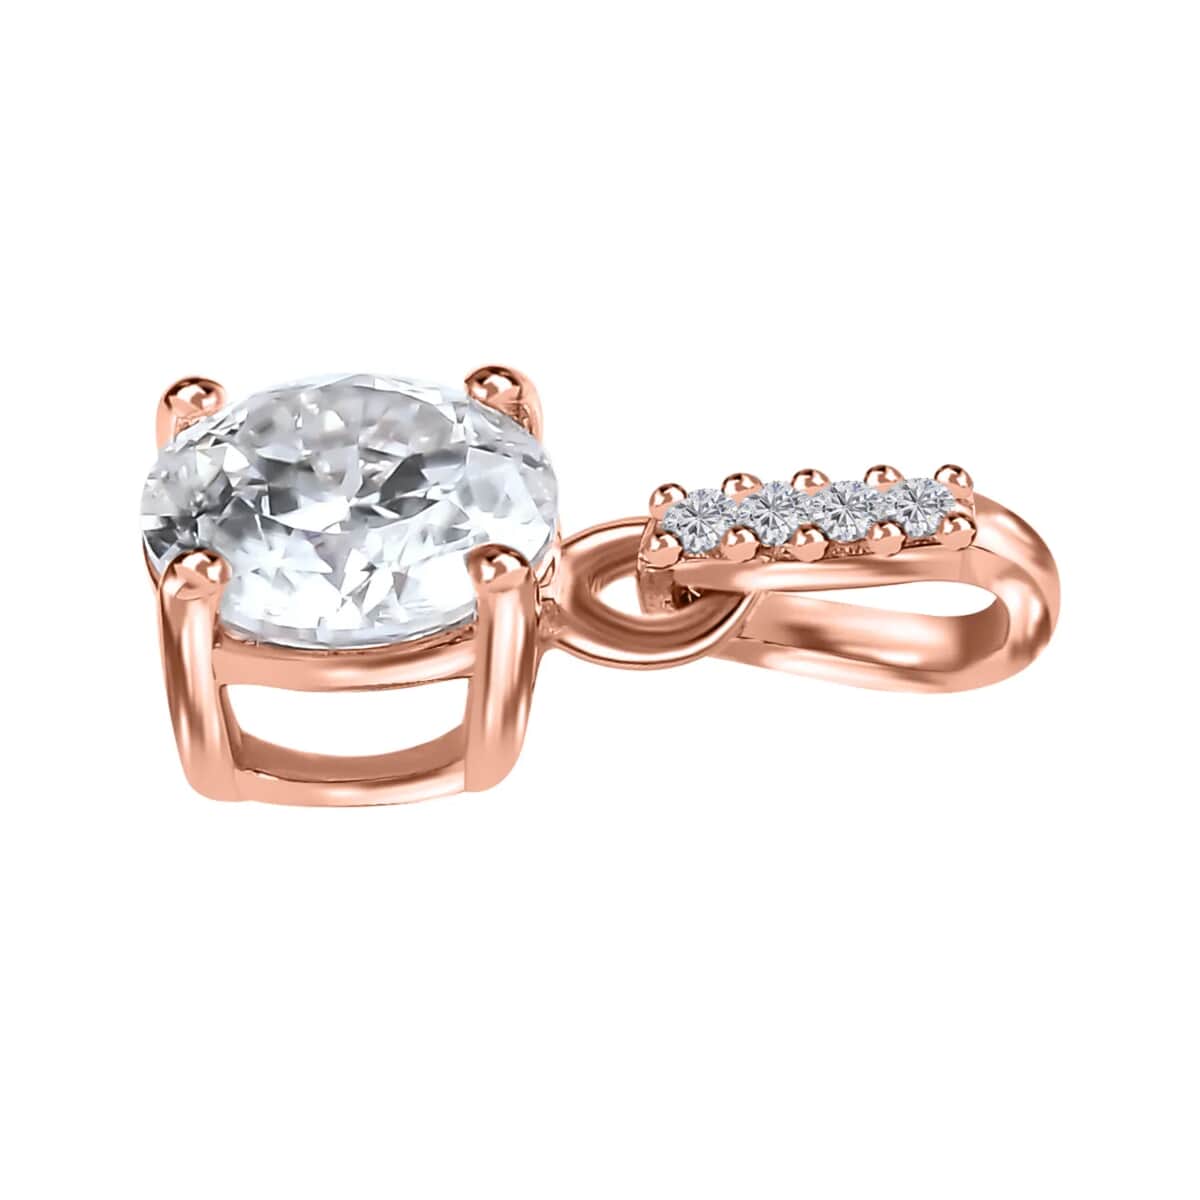 100 Facets Moissanite 1.65 ctw Solitaire Ring and Pendant Set in Vermeil Rose Gold Over Sterling Silver, Moissanite Solitaire Ring, Jewelry Set For Her (Size 6.00) image number 5